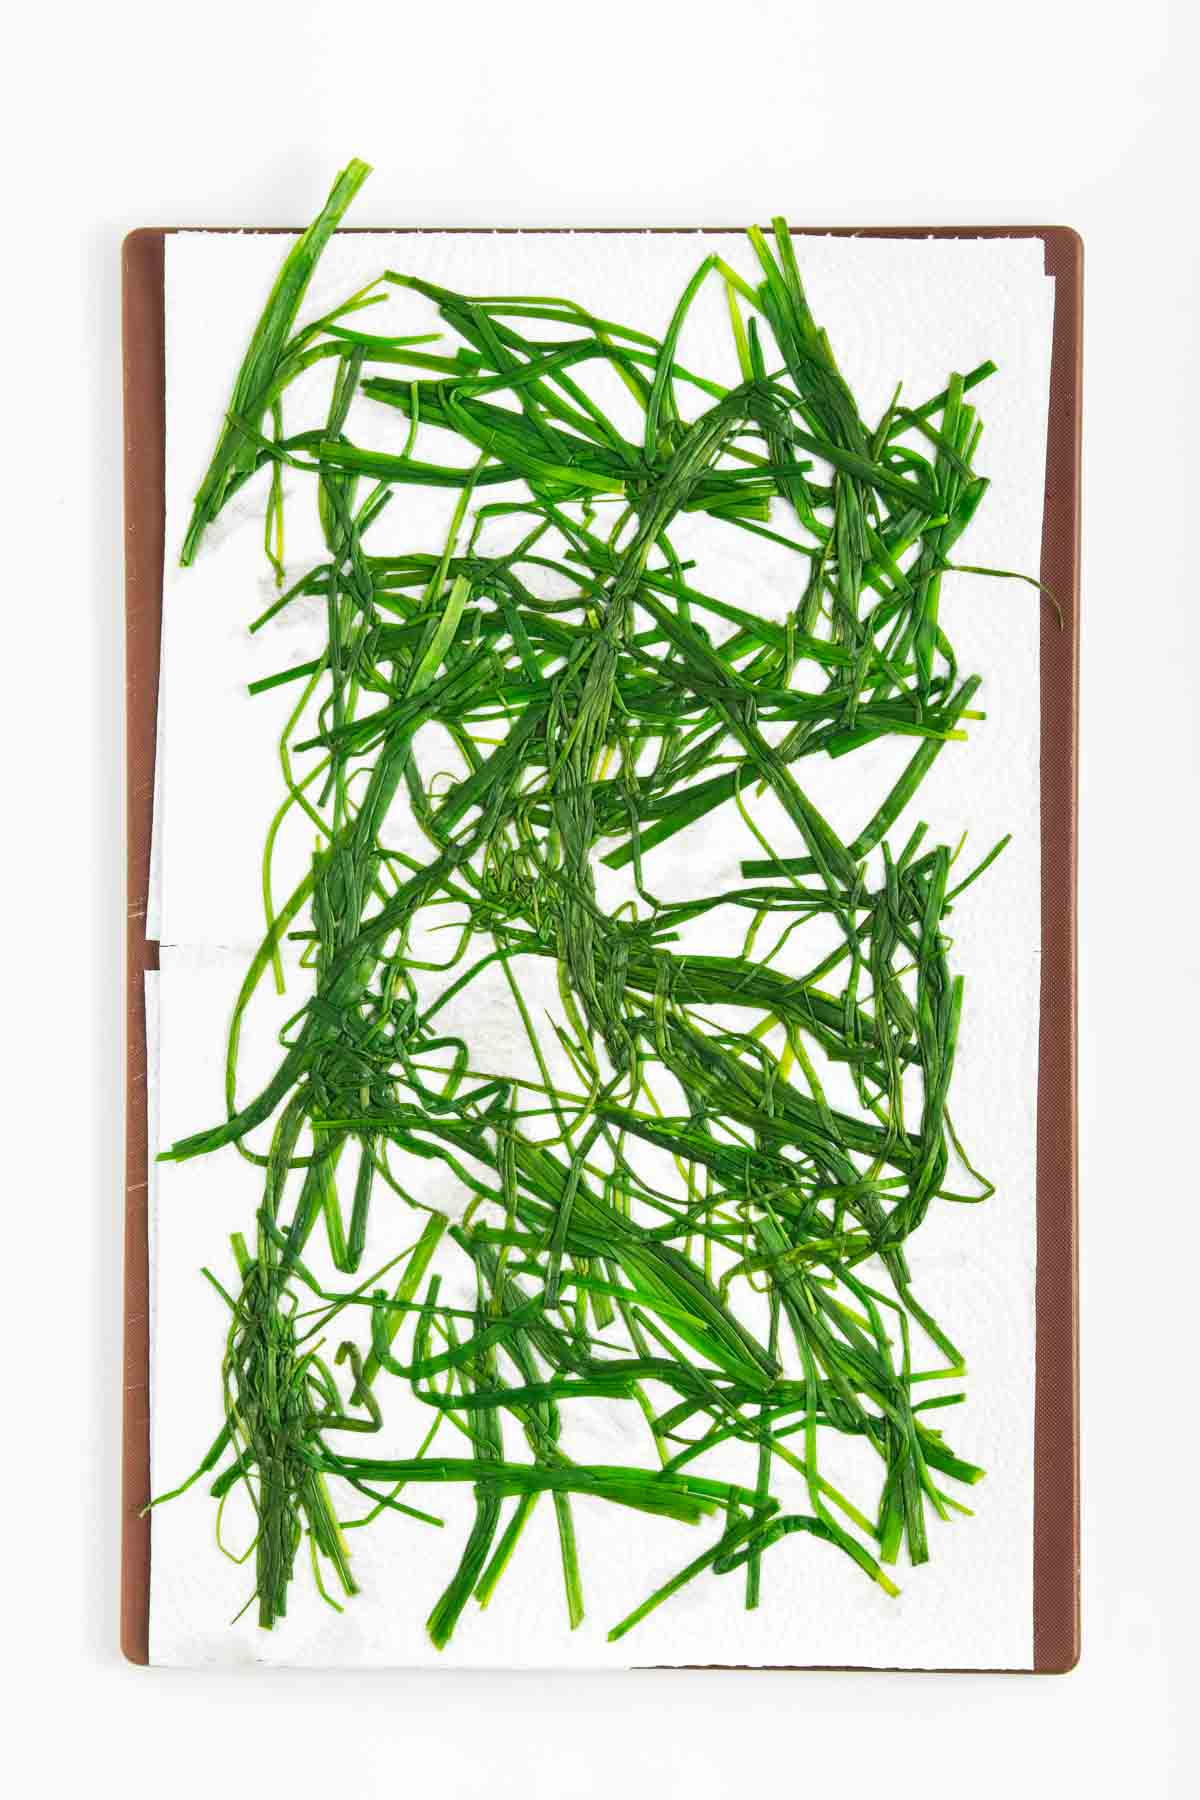 Blanched chives drying on a paper towel